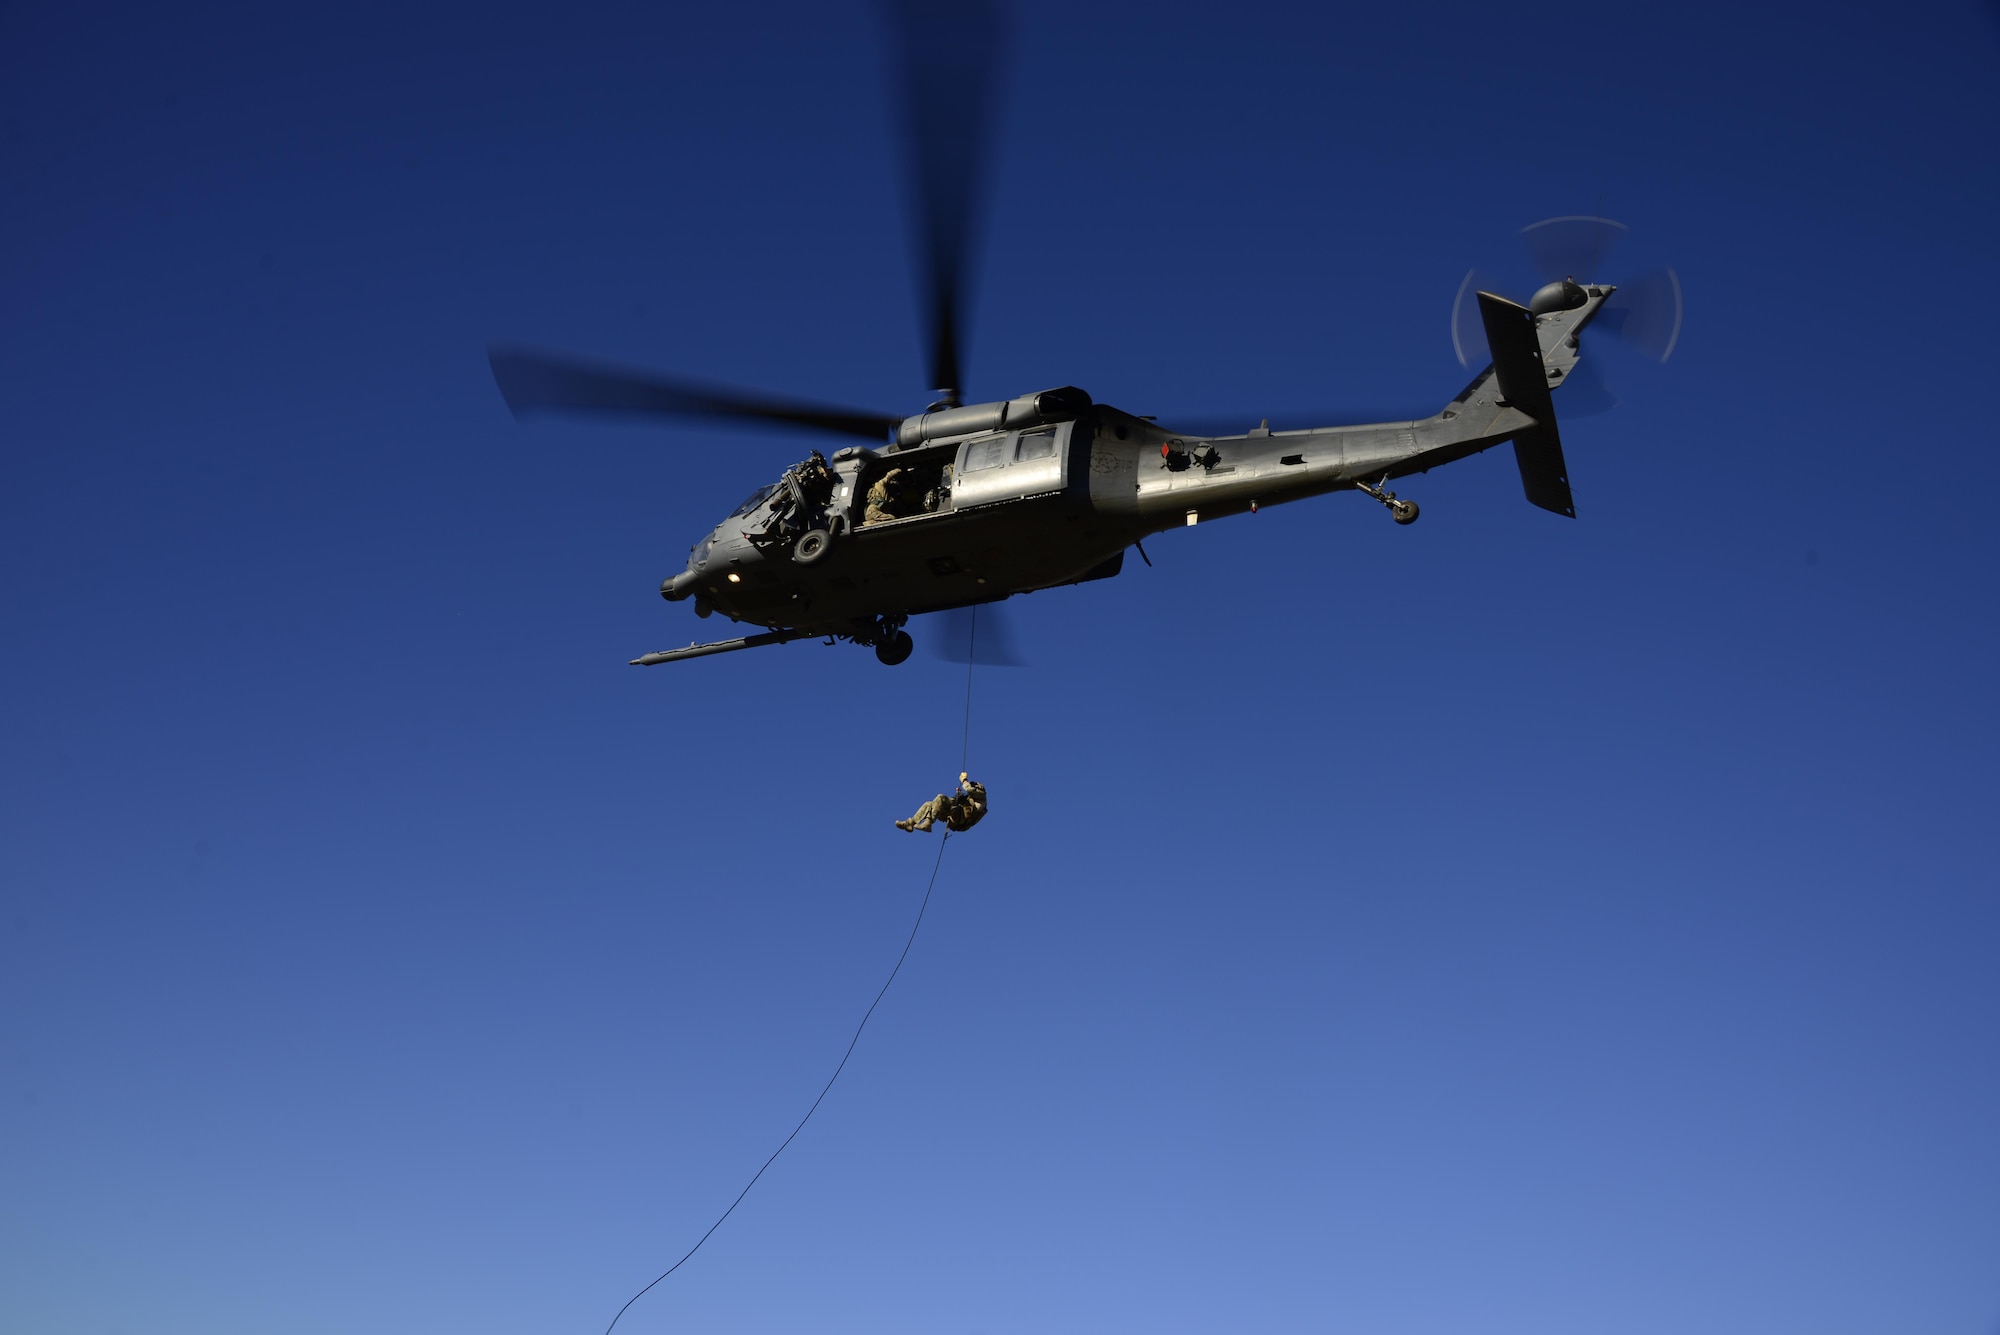 A pararescueman assigned to the 48th Rescue Squadron rappels out of an HH-60G Pave Hawk during alternate insertion/extraction training at Davis-Monthan Air Force Base, Ariz., Oct. 18, 2016.  The four methods that can be used during AIE are fast-rope, rope ladder, rappel and hoist. (U.S. Air Force photo by Senior Airman Betty R. Chevalier)